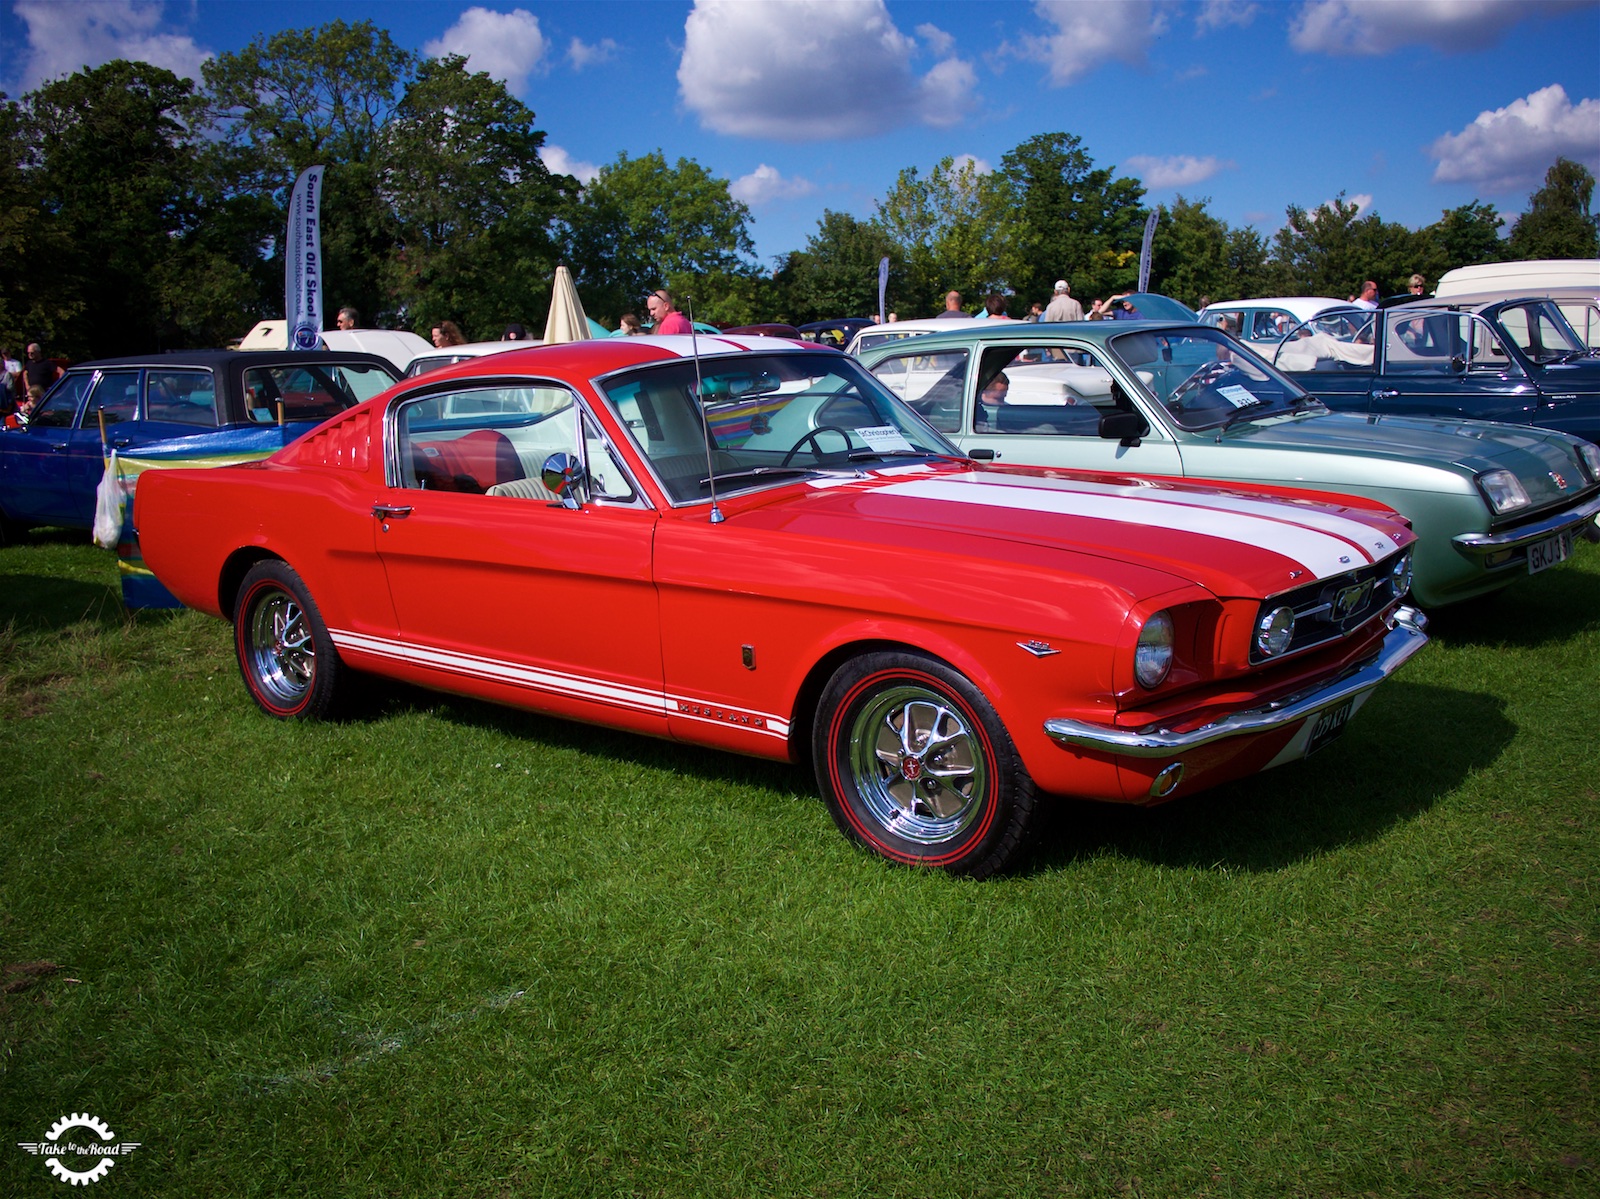 Looking for an old school muscle car? Why you should consider a 1965 Mustang